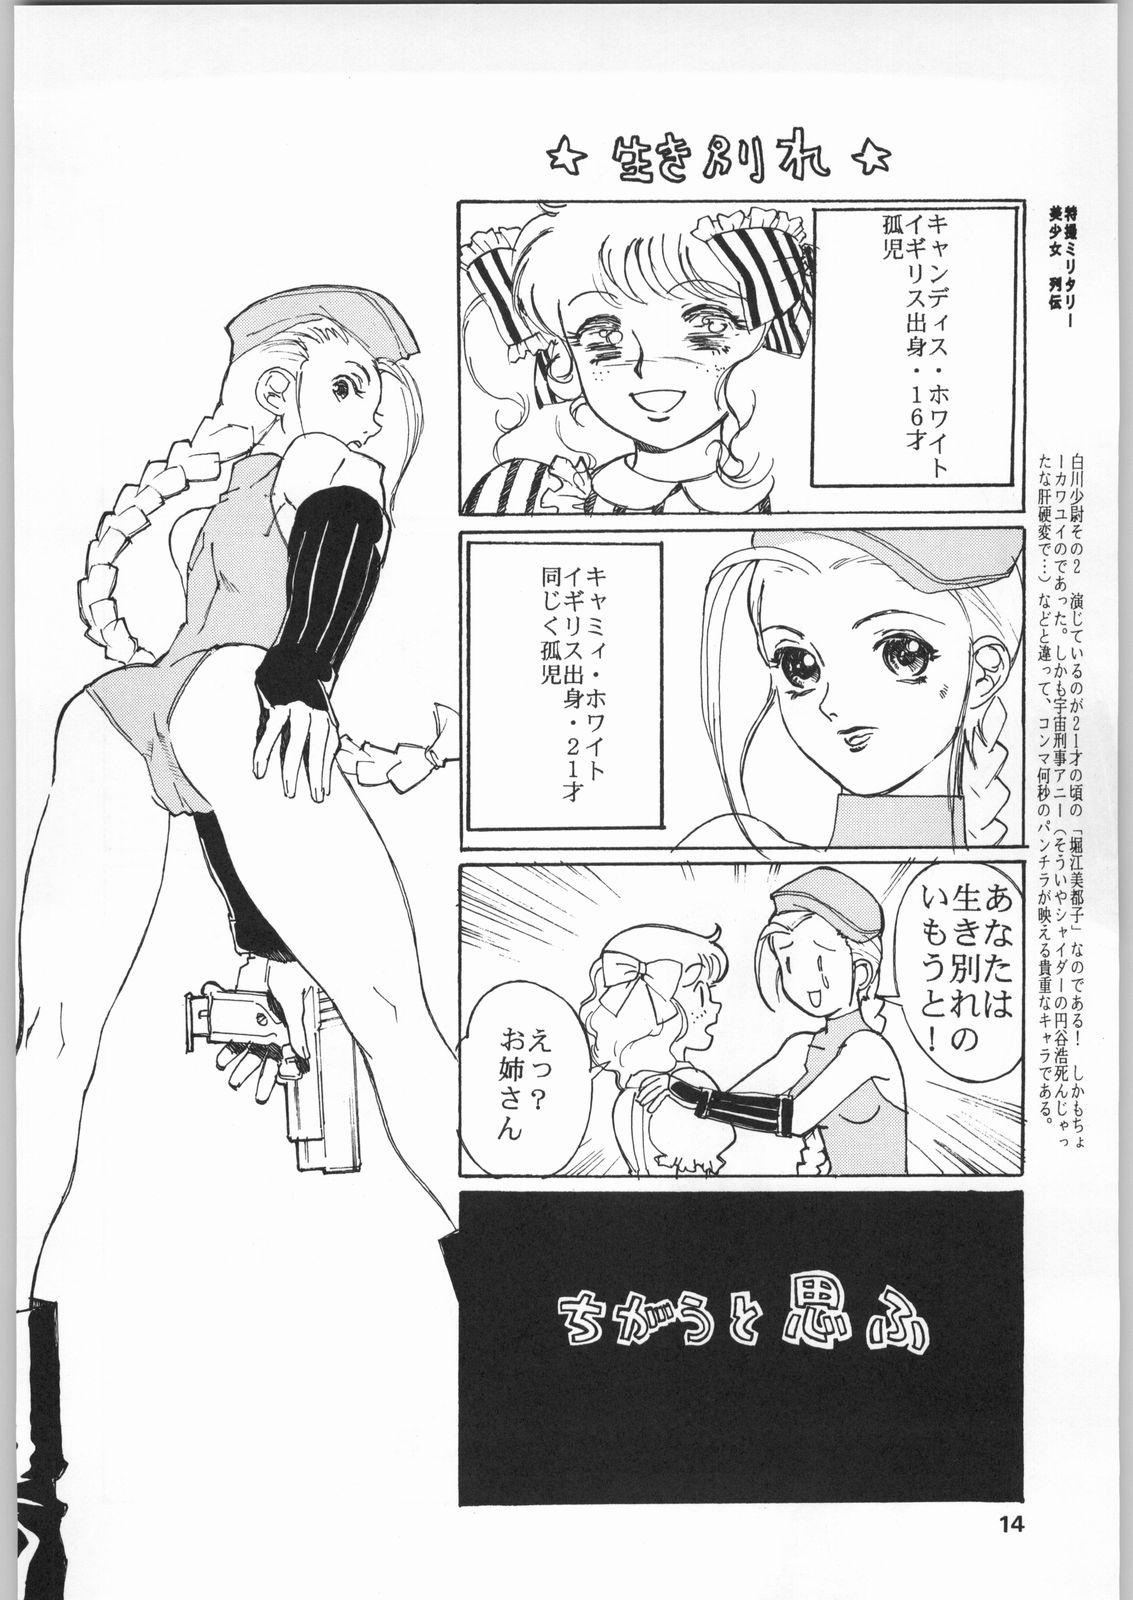 Family Roleplay Chousen Ame Ver.19 - Galaxy angel Gundam Youth Porn - Page 13